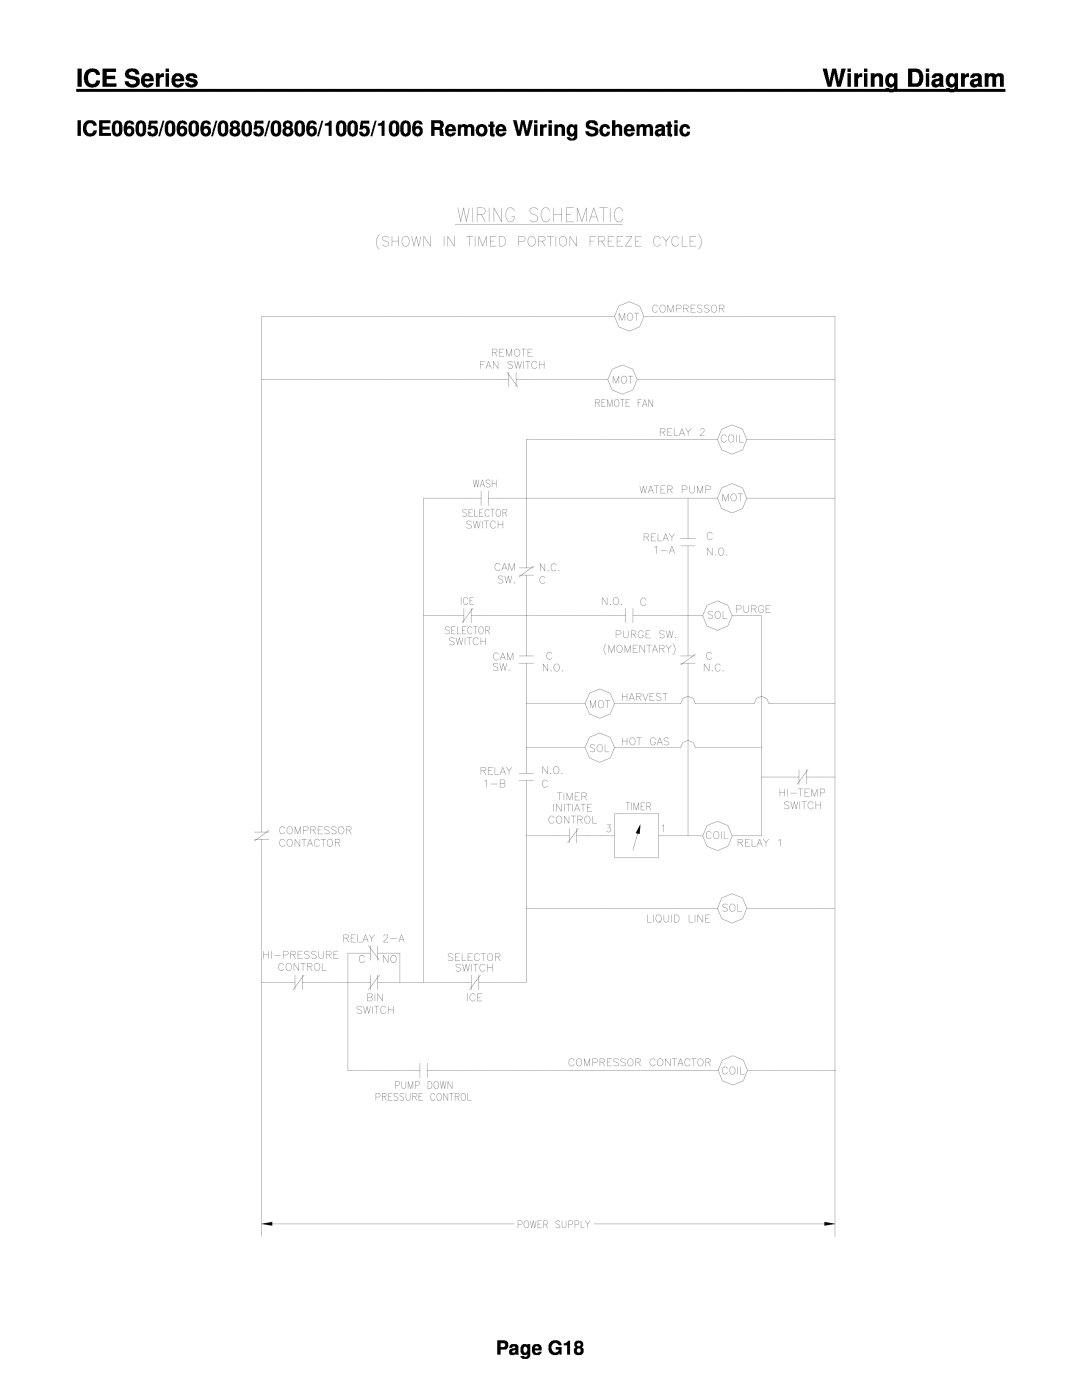 Ice-O-Matic ICE0250 Series ICE0605/0606/0805/0806/1005/1006 Remote Wiring Schematic, ICE Series, Wiring Diagram, Page G18 